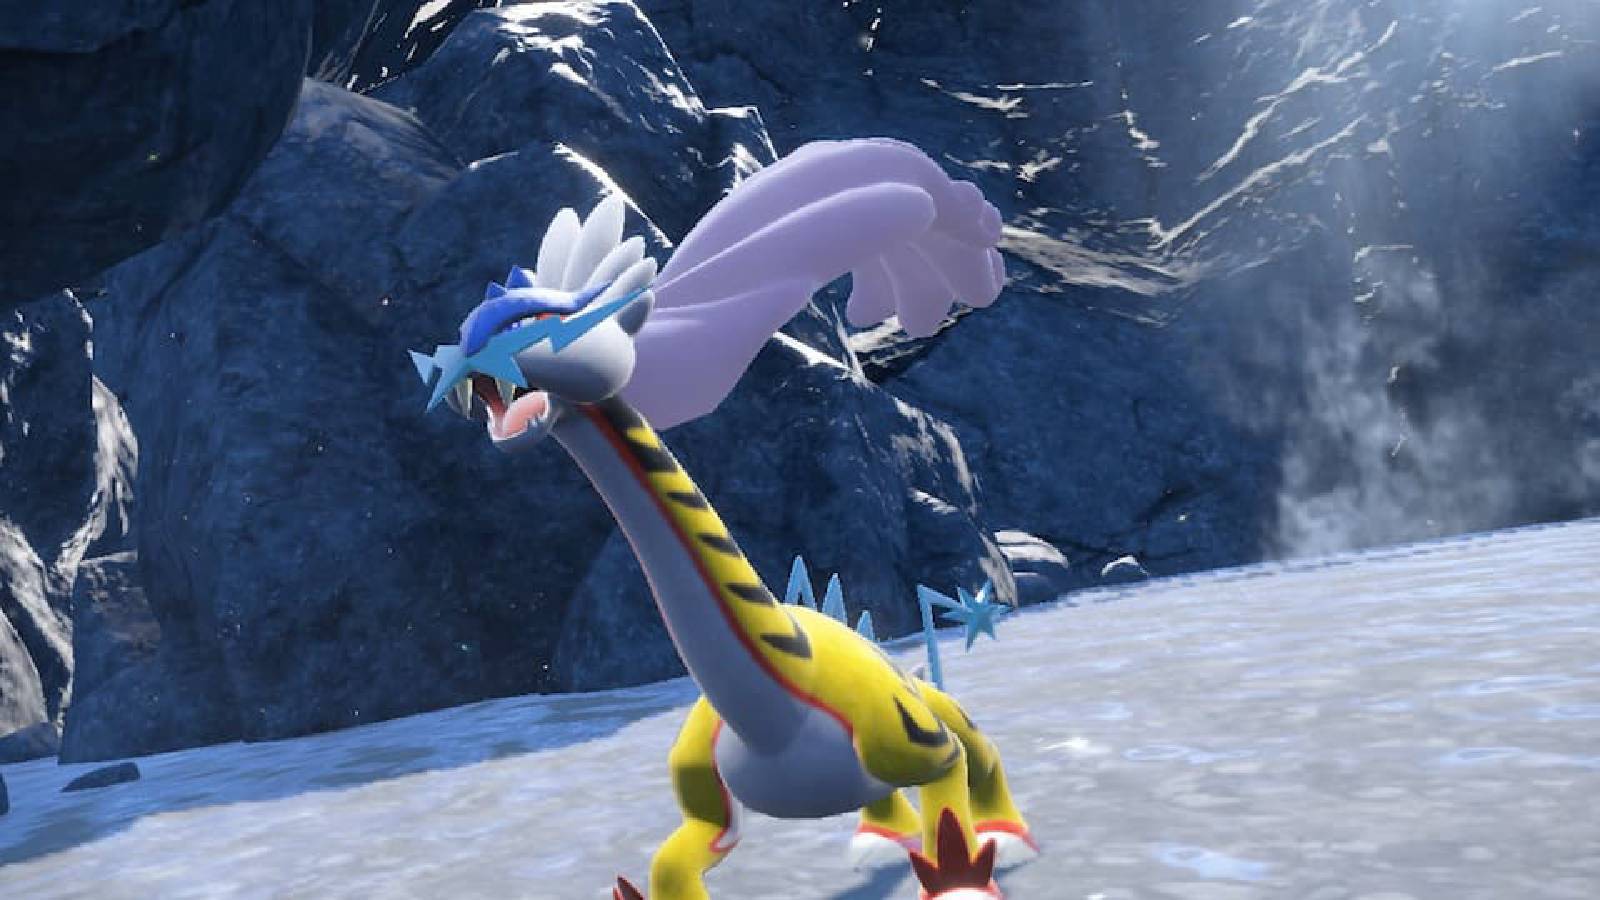 The Pokemon Raging Bolt appears in a rocky clearing